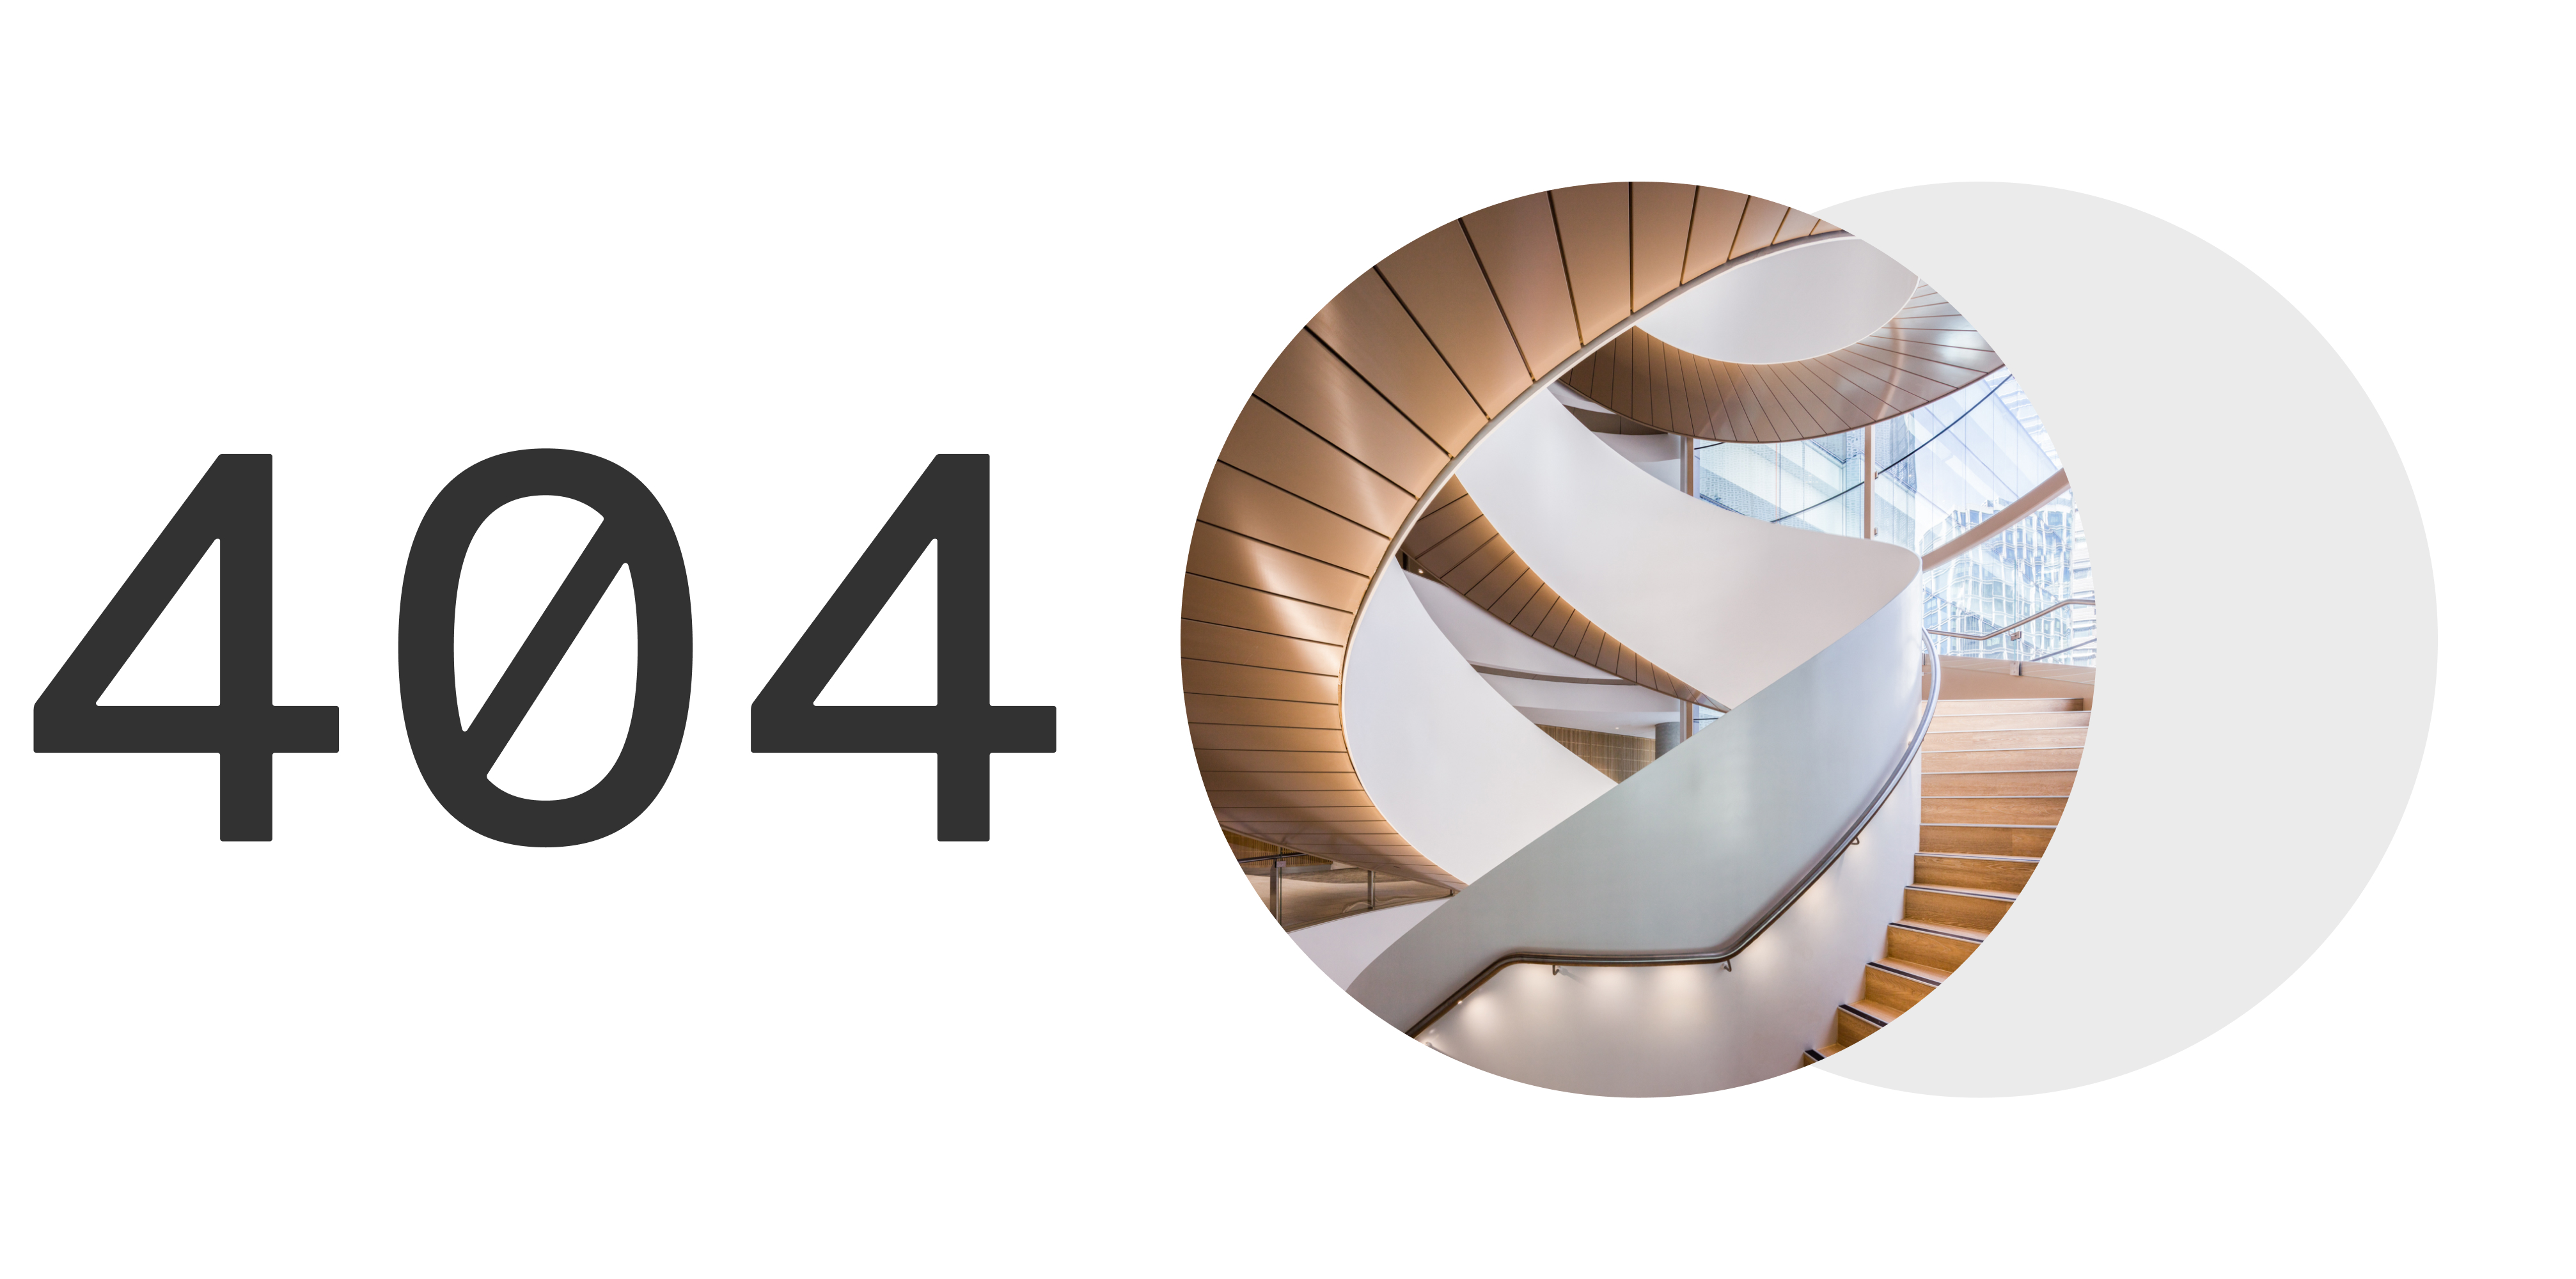 404 and a circular image of the double helix staircase in UTS building 2